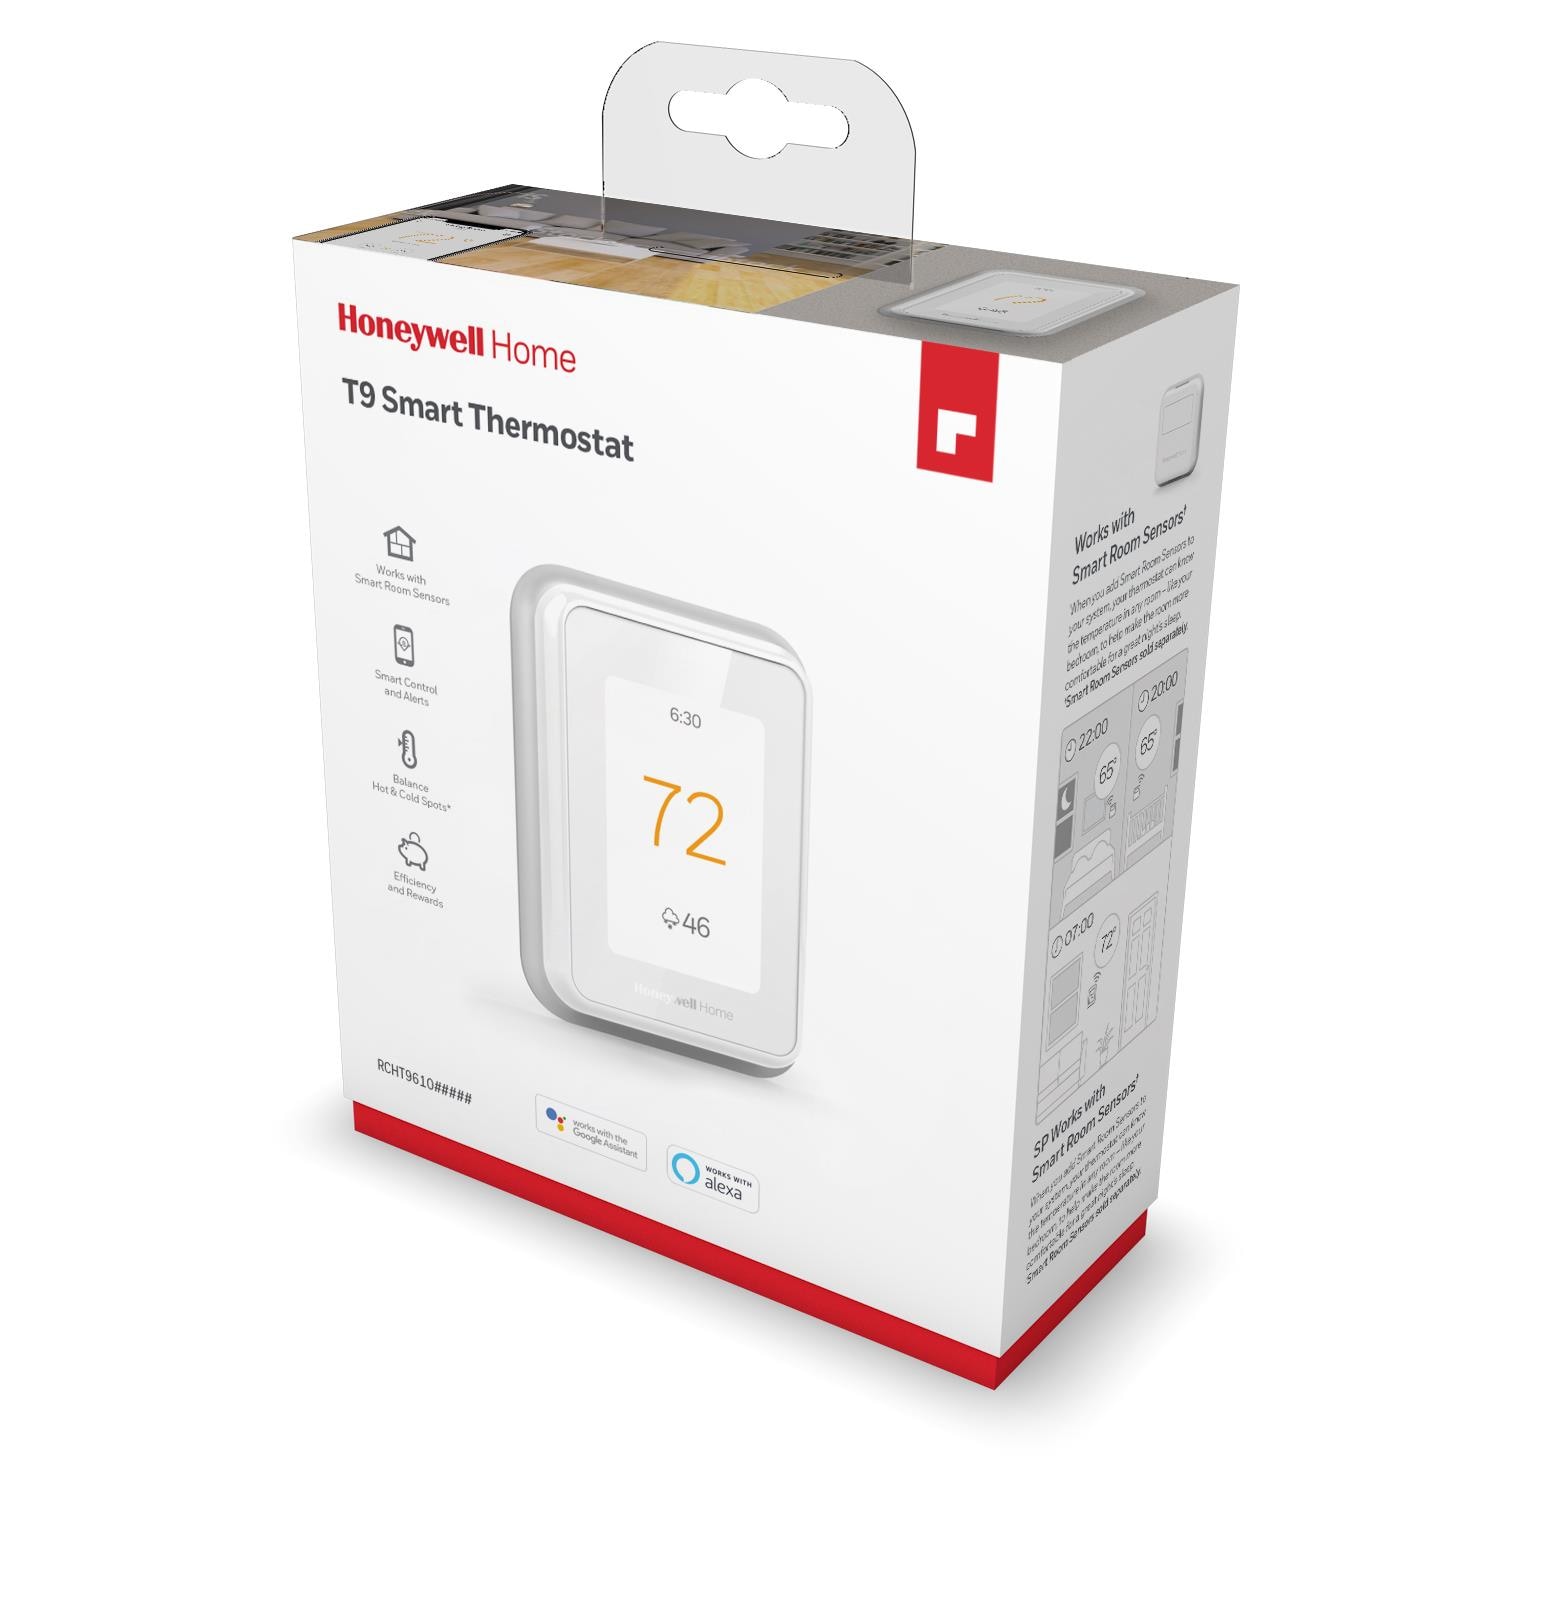 Honeywell Home T9 Wifi Thermostat with Smart Sensor